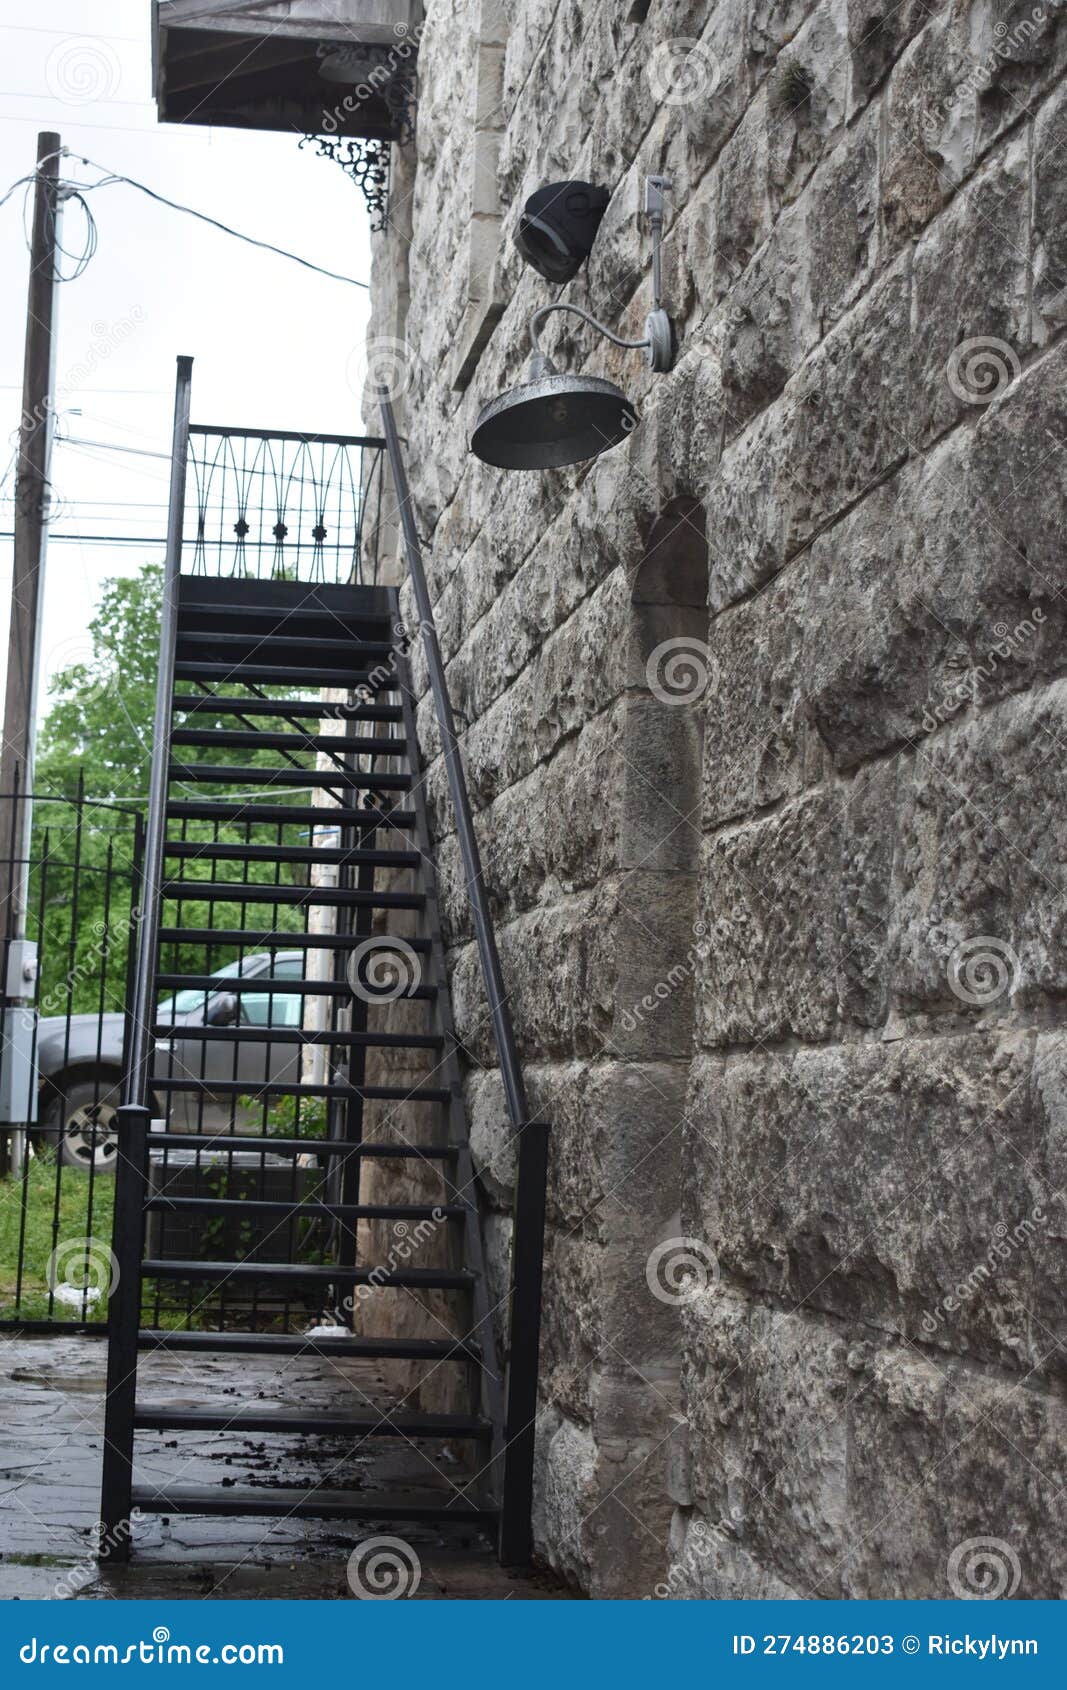 stone wall and steel stairs in bandera texas